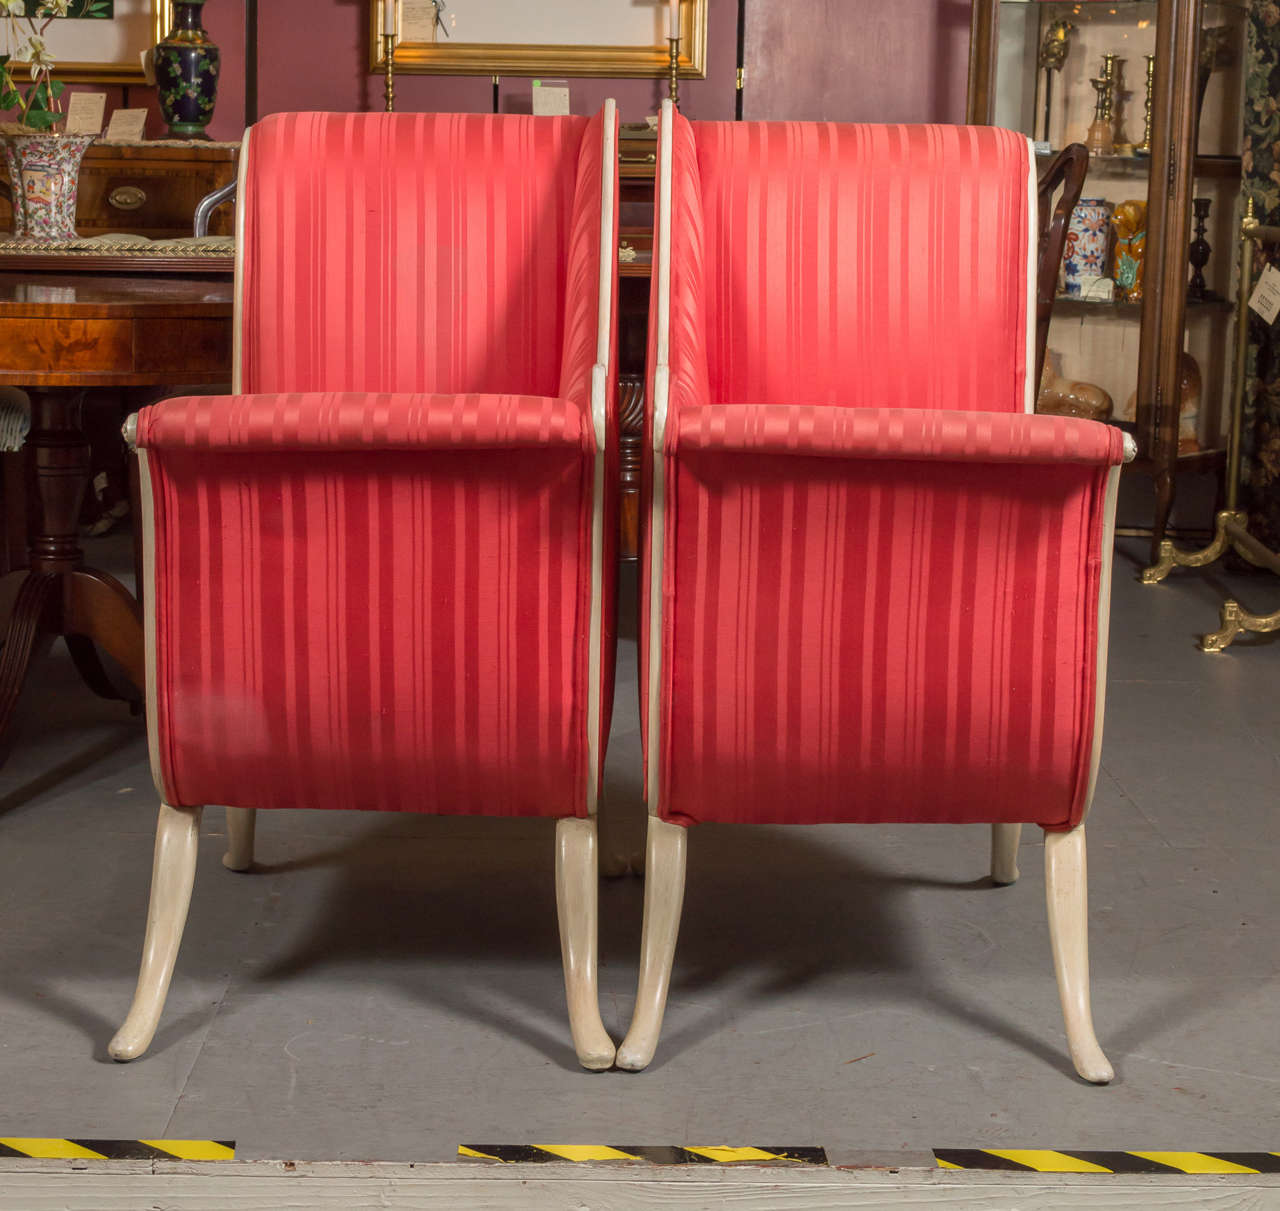 Pair of Fabulous 1950s Hollywood Regency Chairs 1